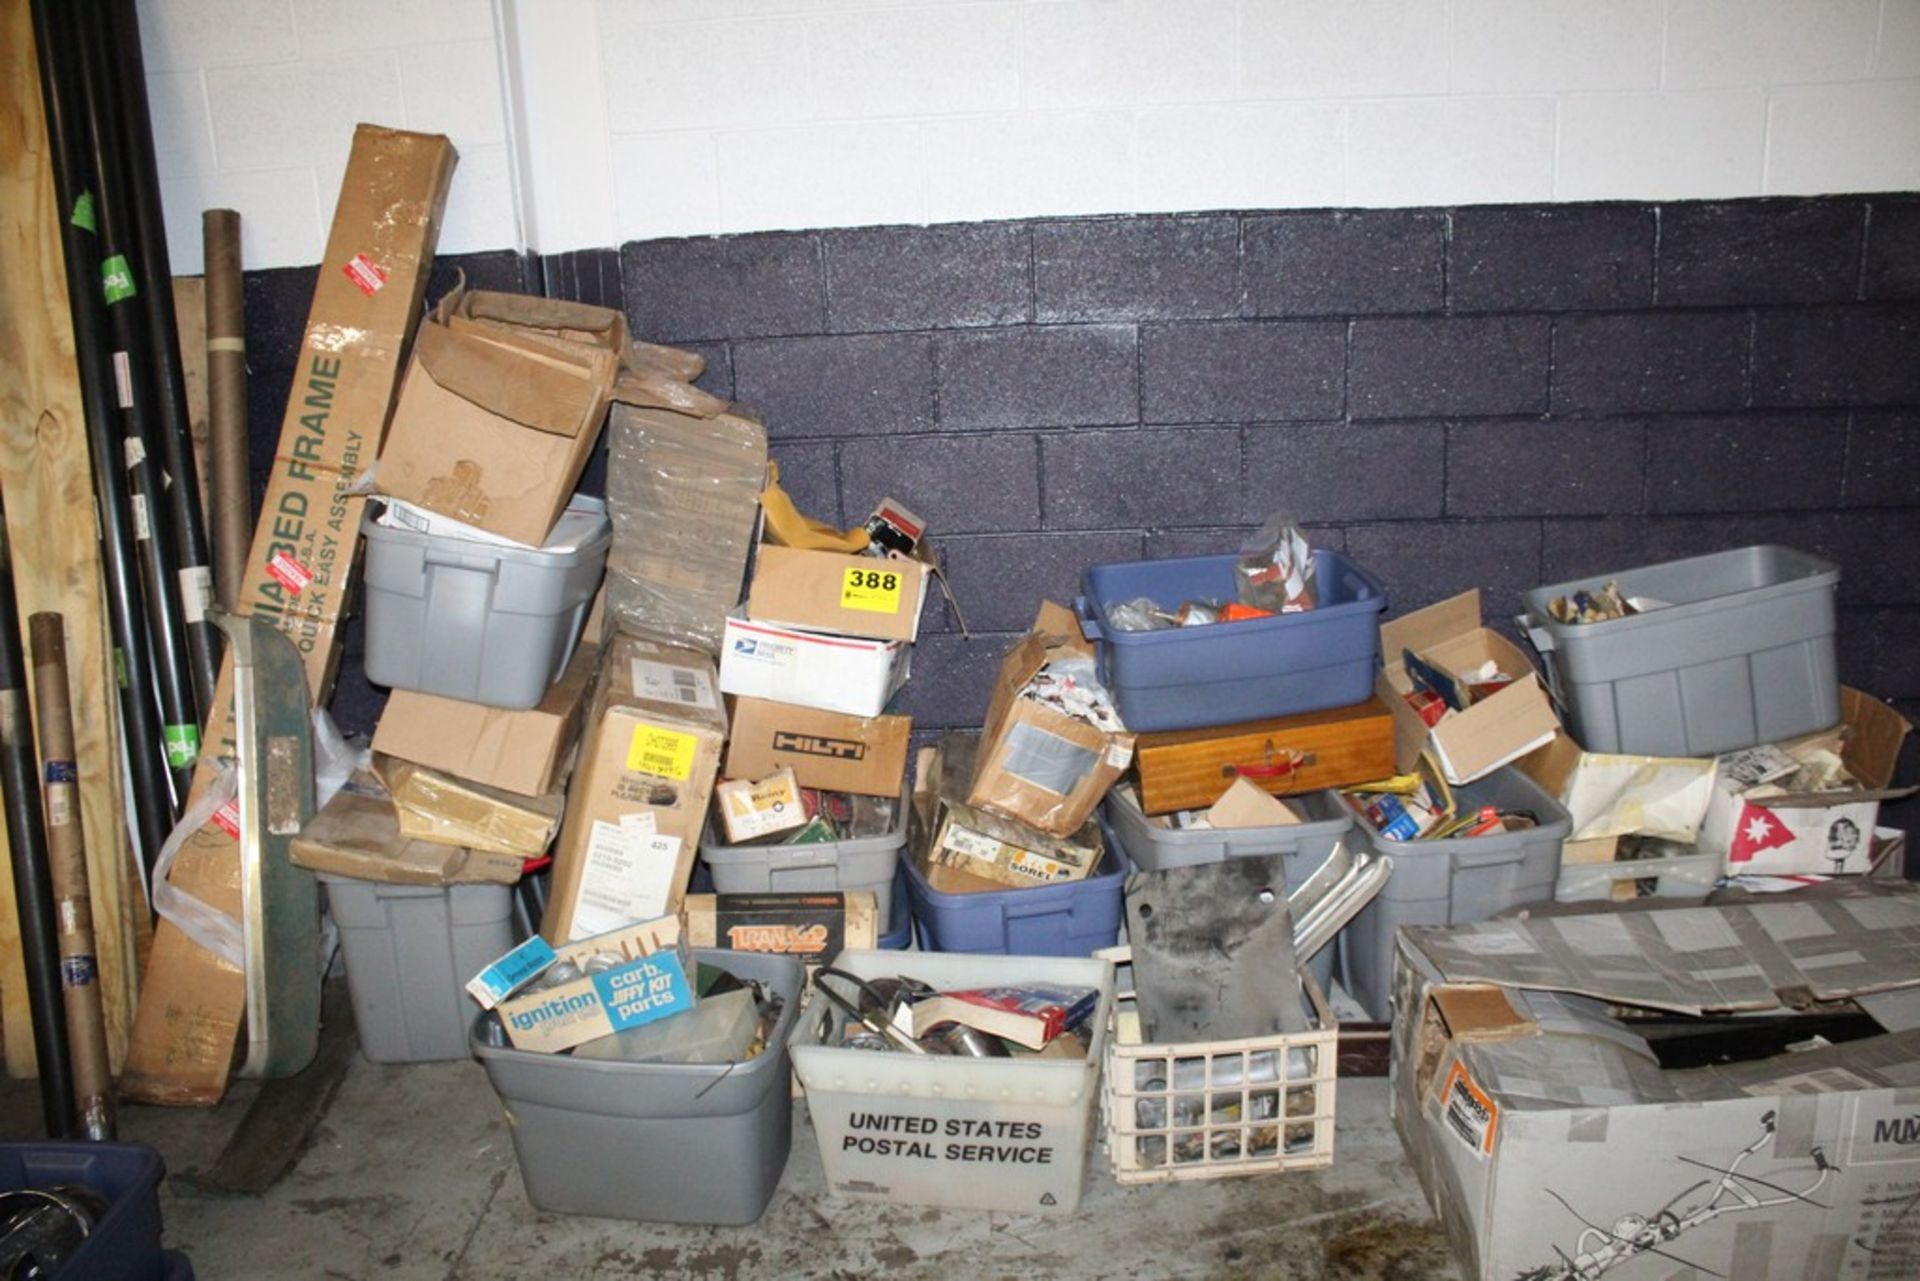 LARGE QTY OF VINTAGE CAR PARTS IN TUBS & BOXES AGAINST WALL